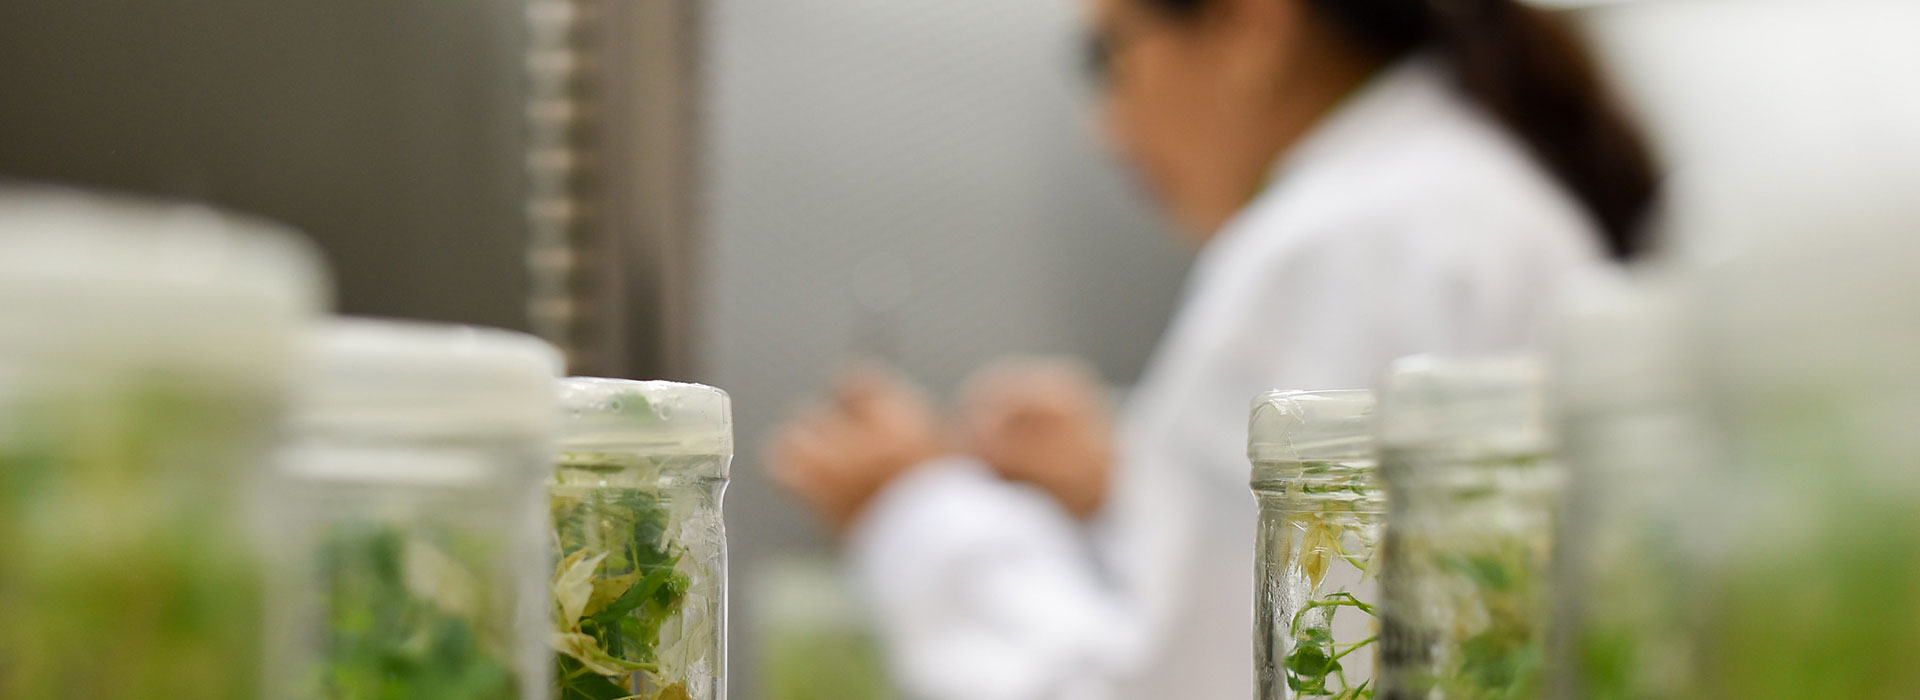 Laboratory environment with focused plant samples in the foreground and a blurred researcher in the background.